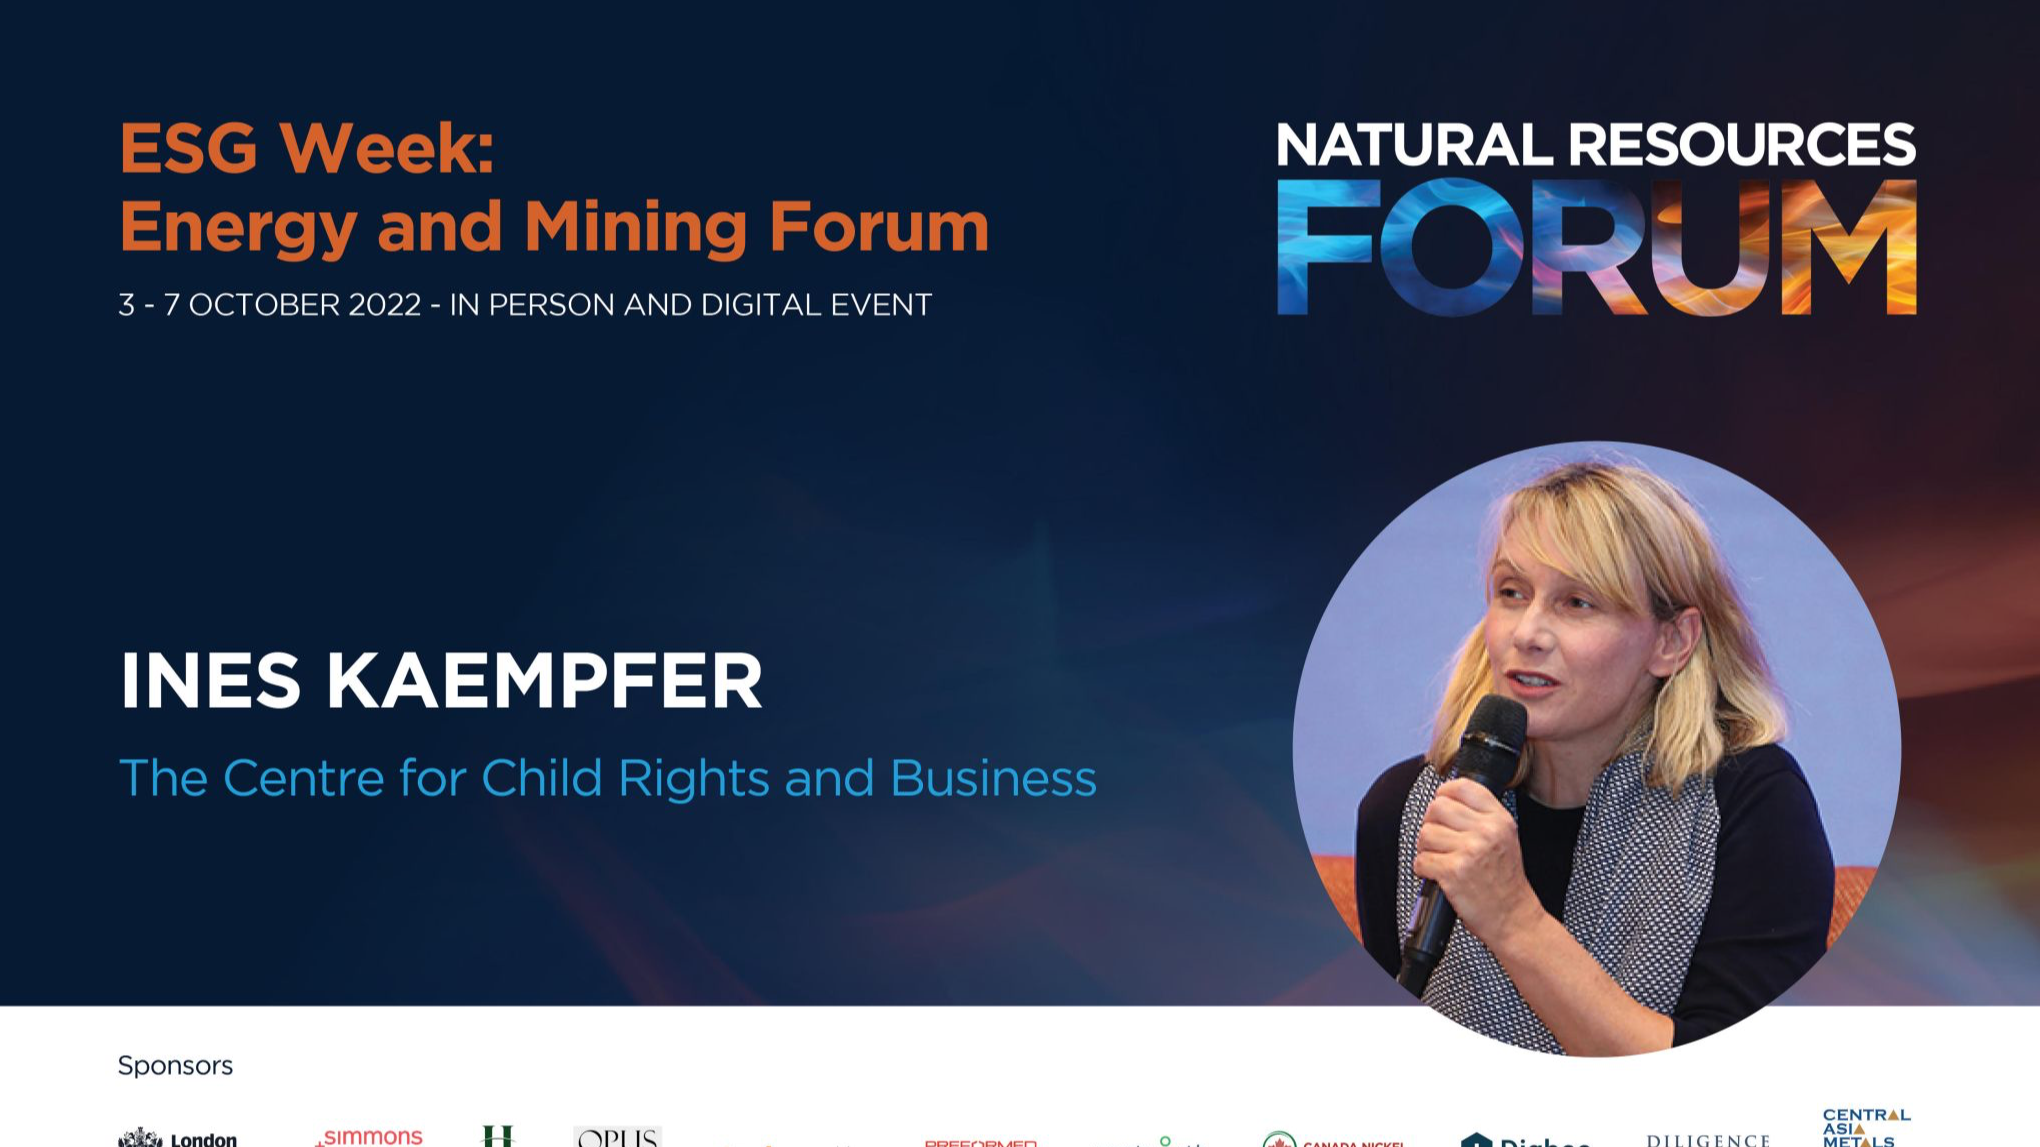 Oct 6 | Social Impact, Modern Slavery & Supply Chain Panel for The Natural Resources Forum: ESG Week 2022 - Energy & Mining Forum 